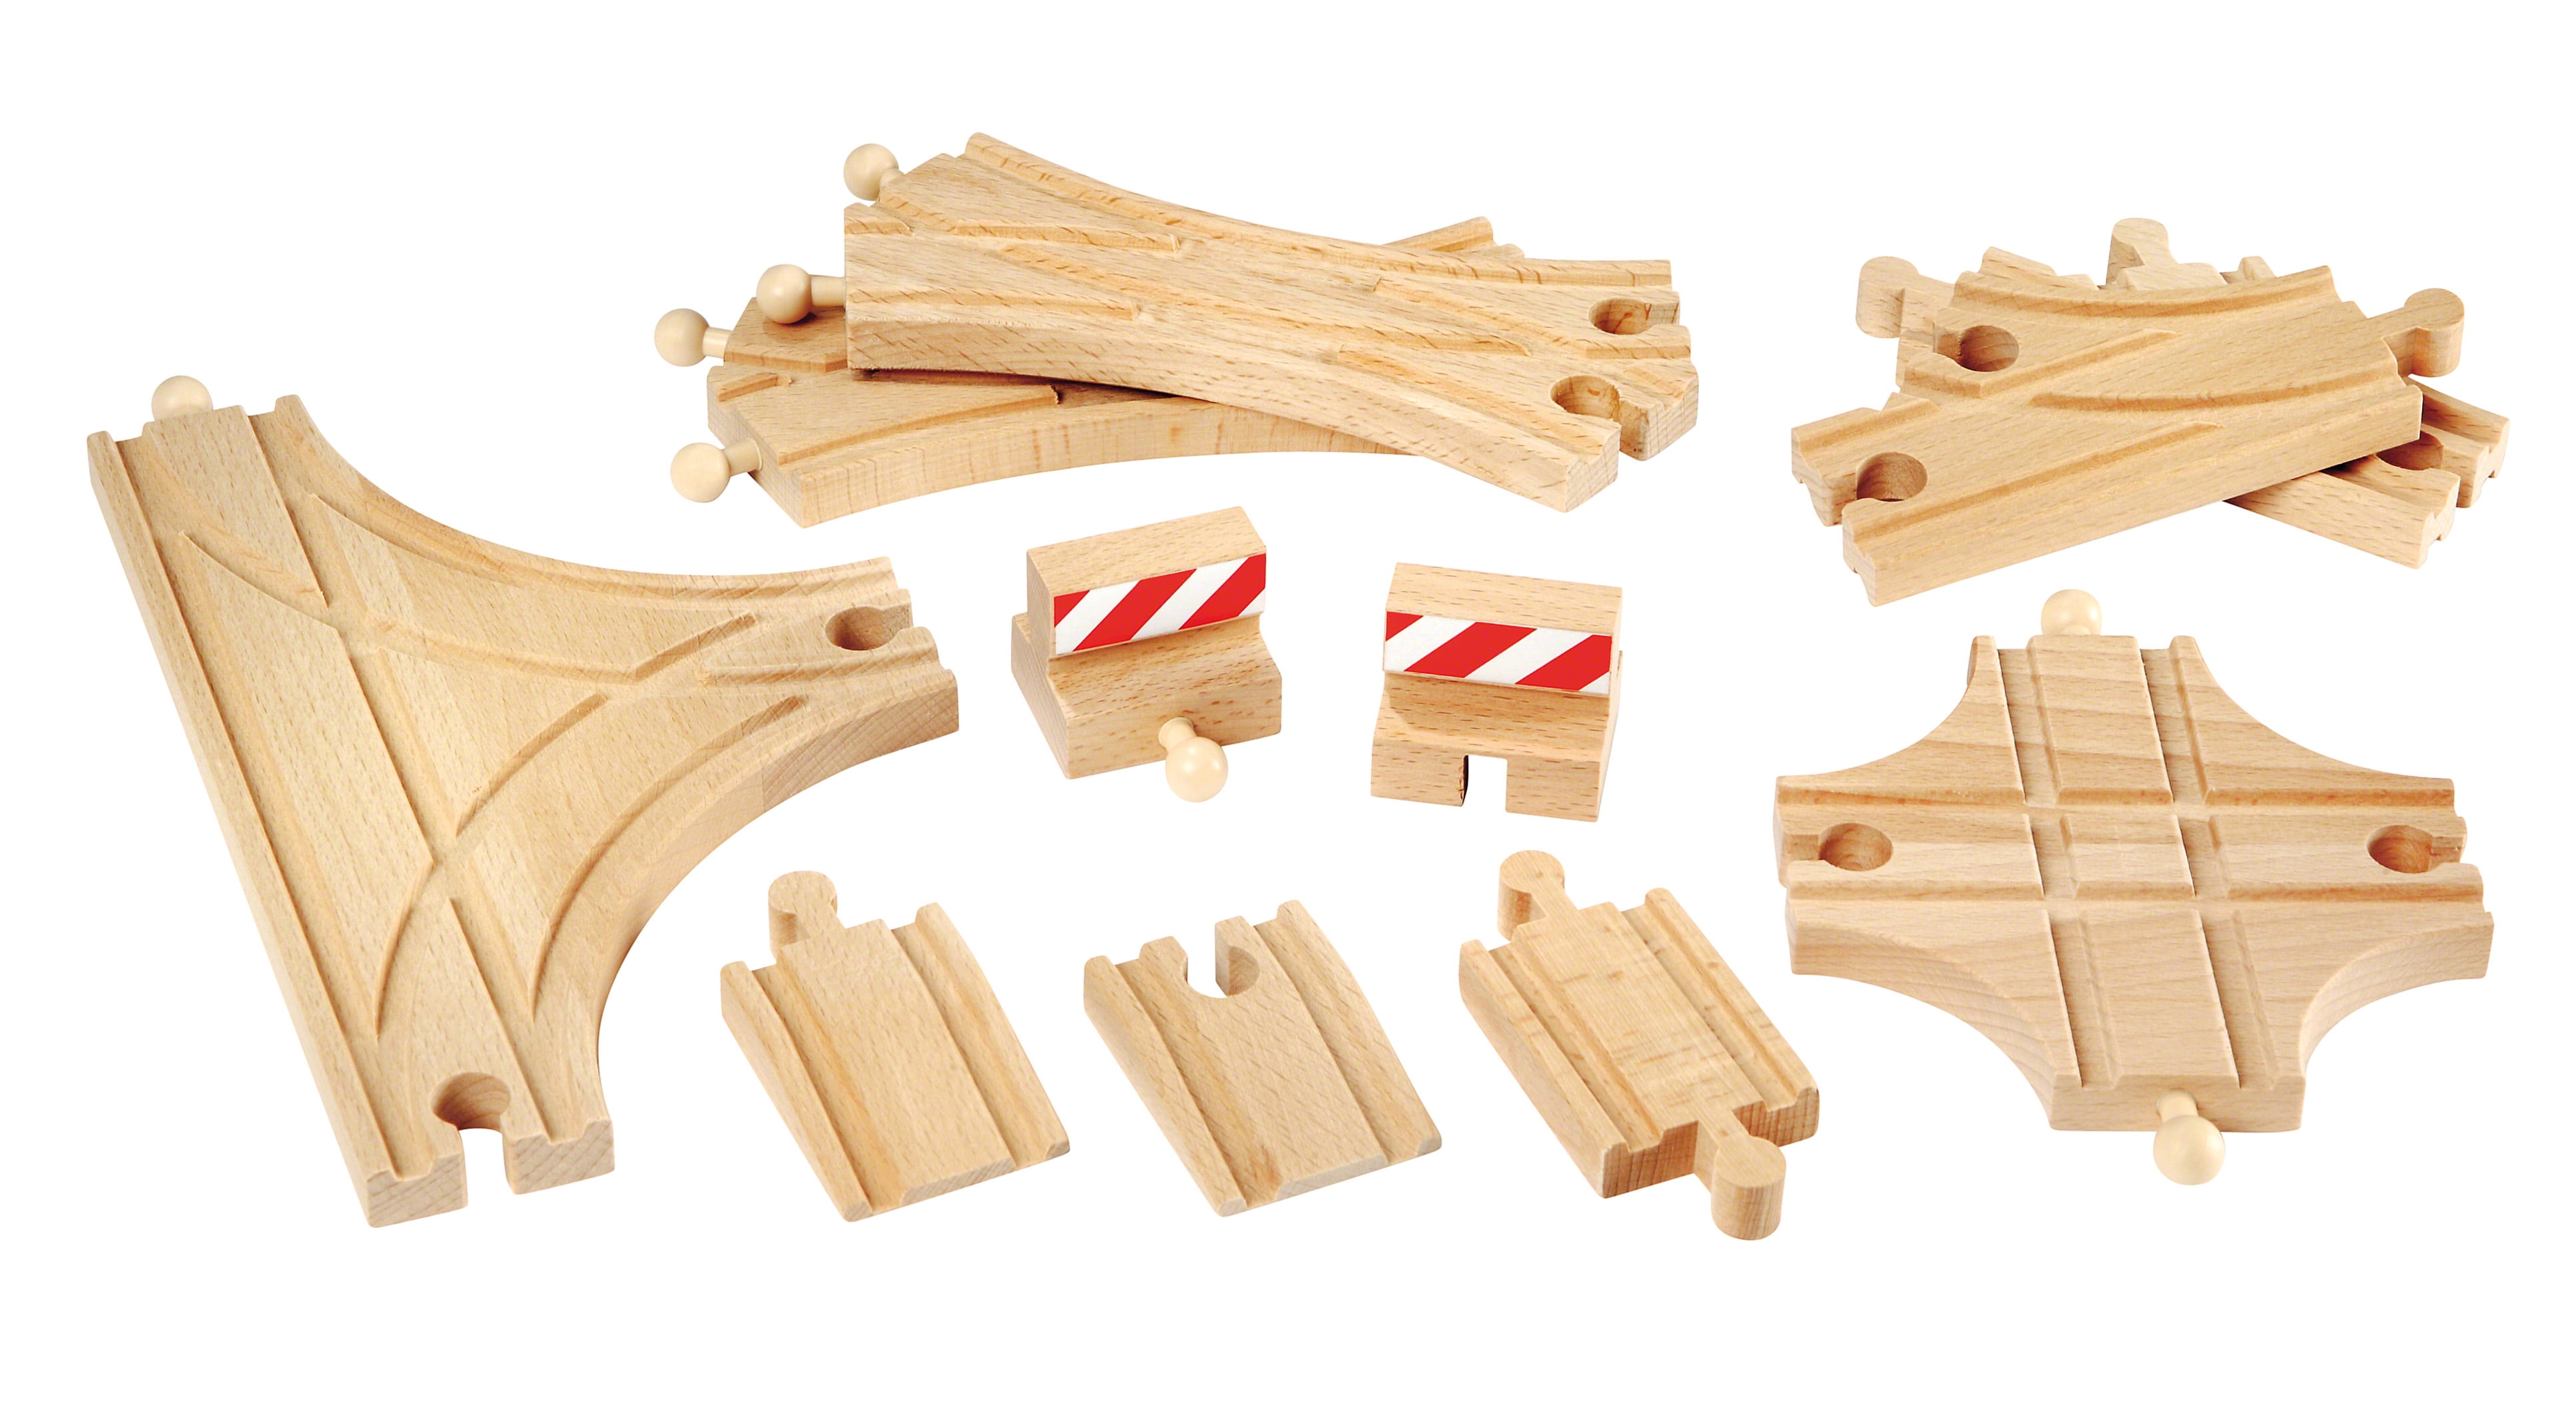 Brio Wood Rail Train Accessory Expansion Switch Crossing Track Railway Kids Toys 